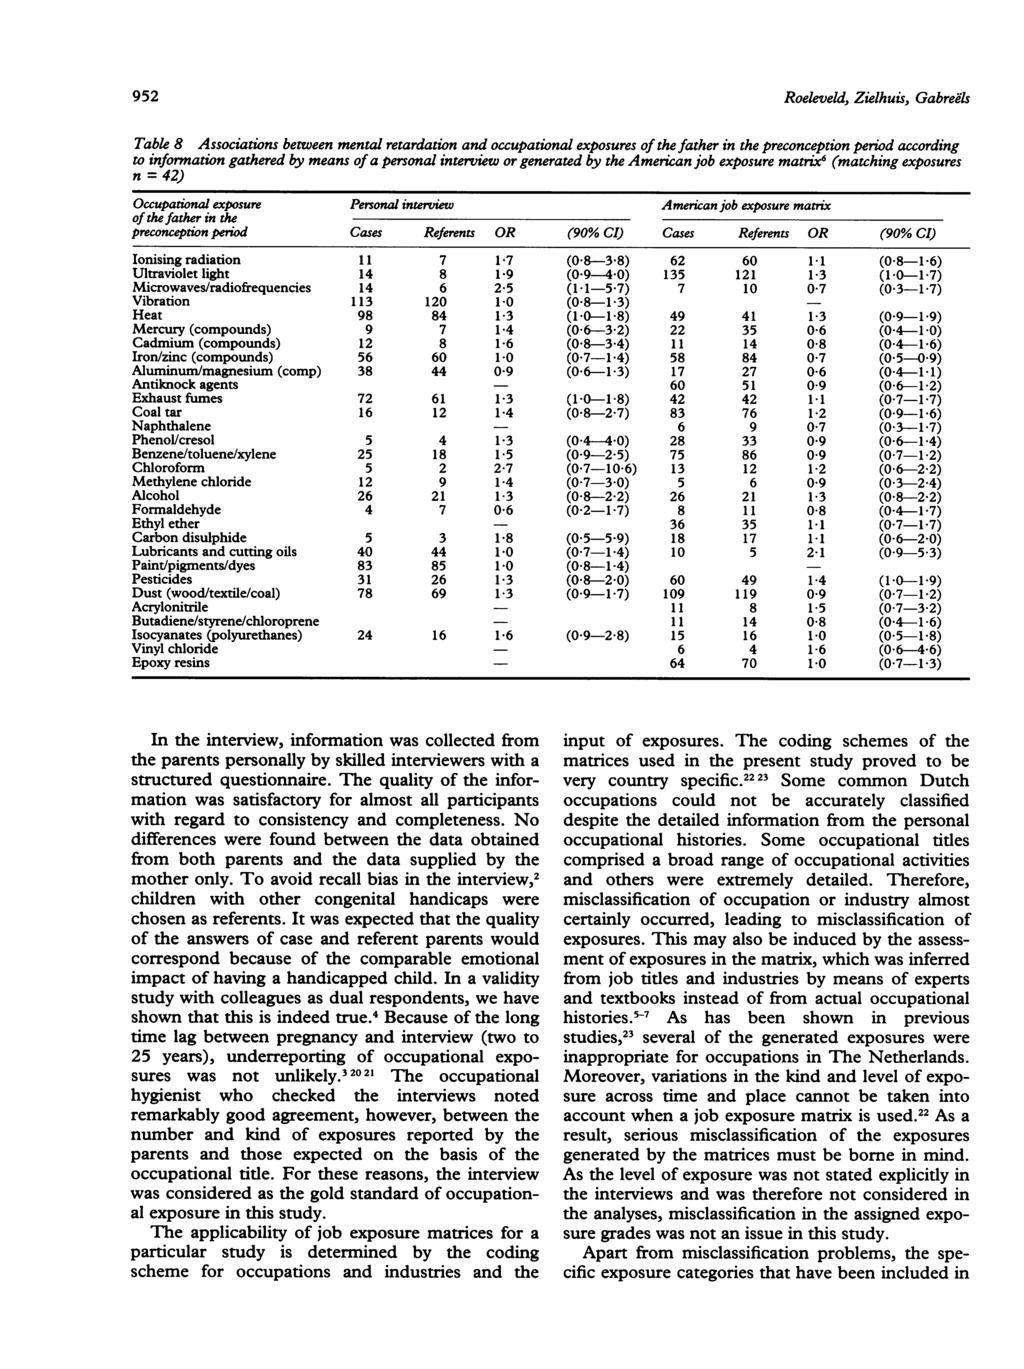 952 Roeleveld, Zielhuis, Gabreels Table 8 Associations between mental retardation and occupational exposures of the father in the preconception period according to information gathered by means of a